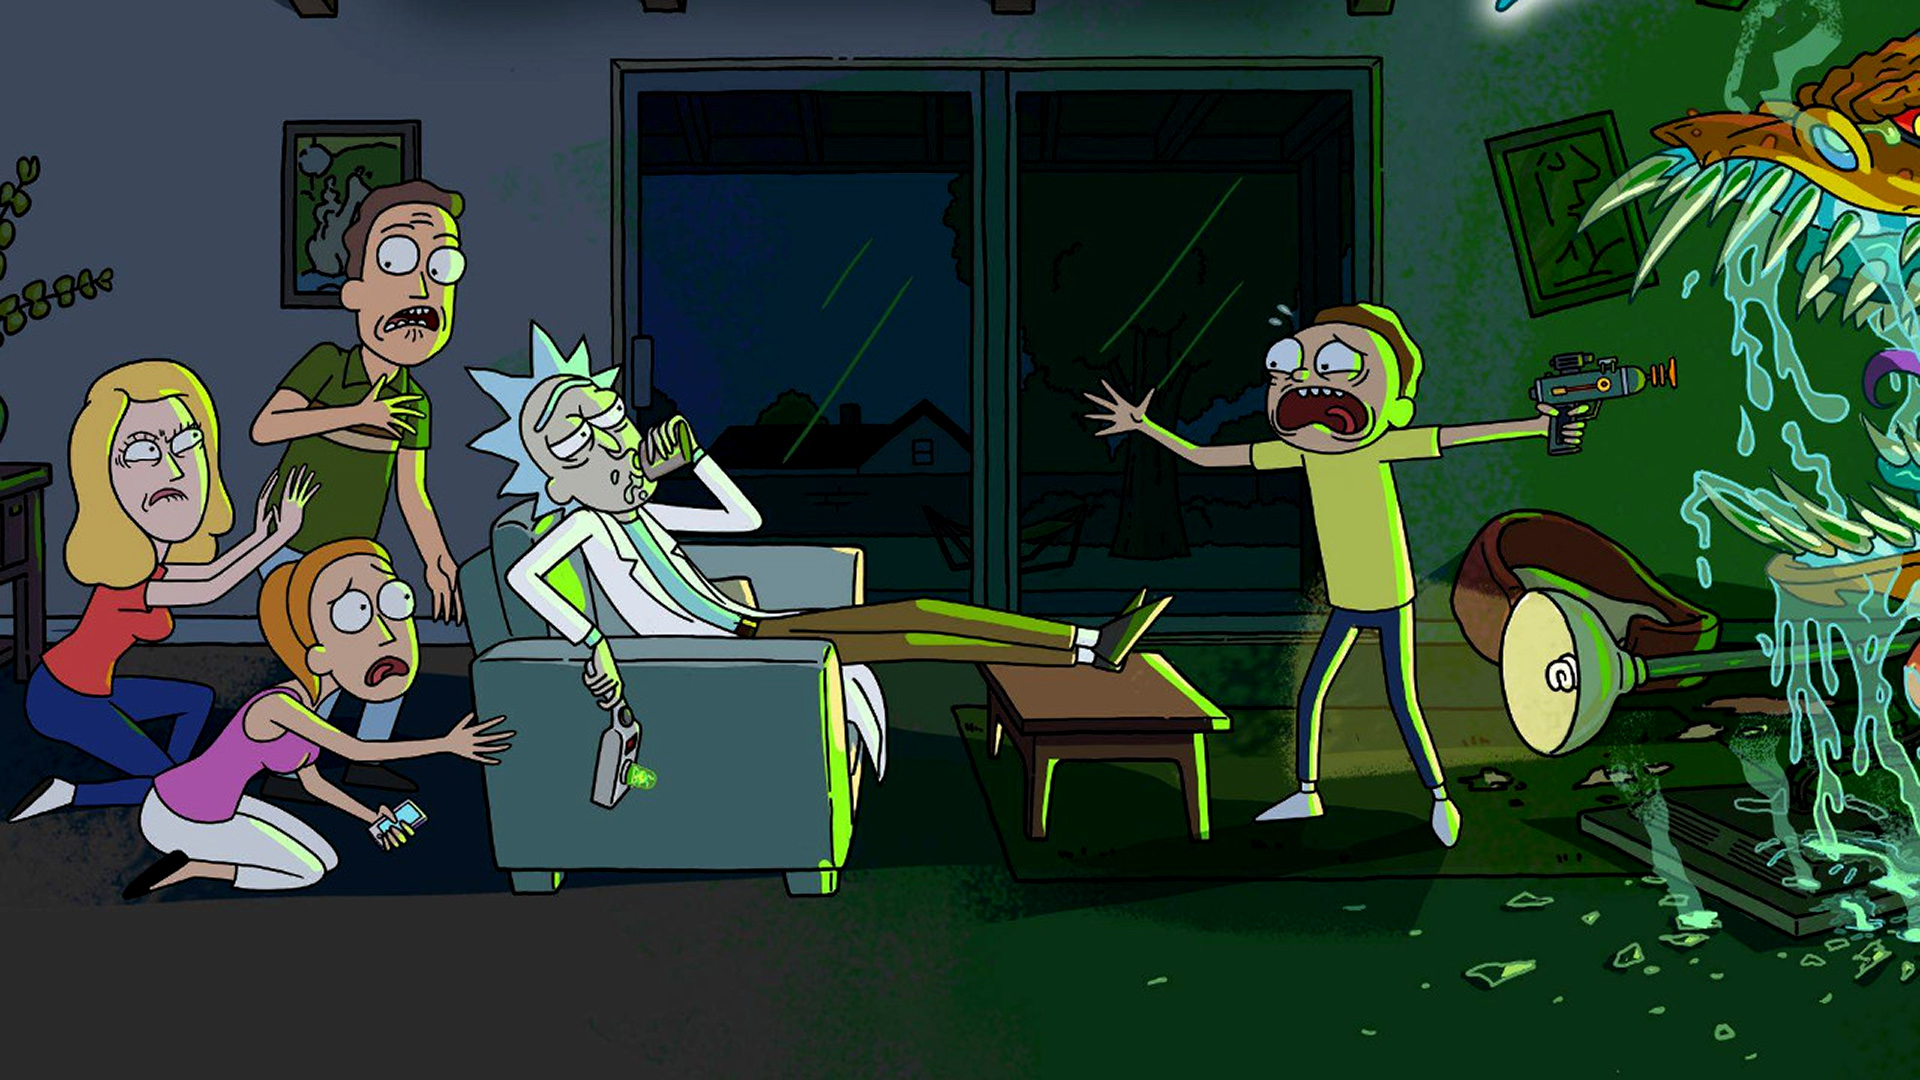 Rick and Morty Images. 